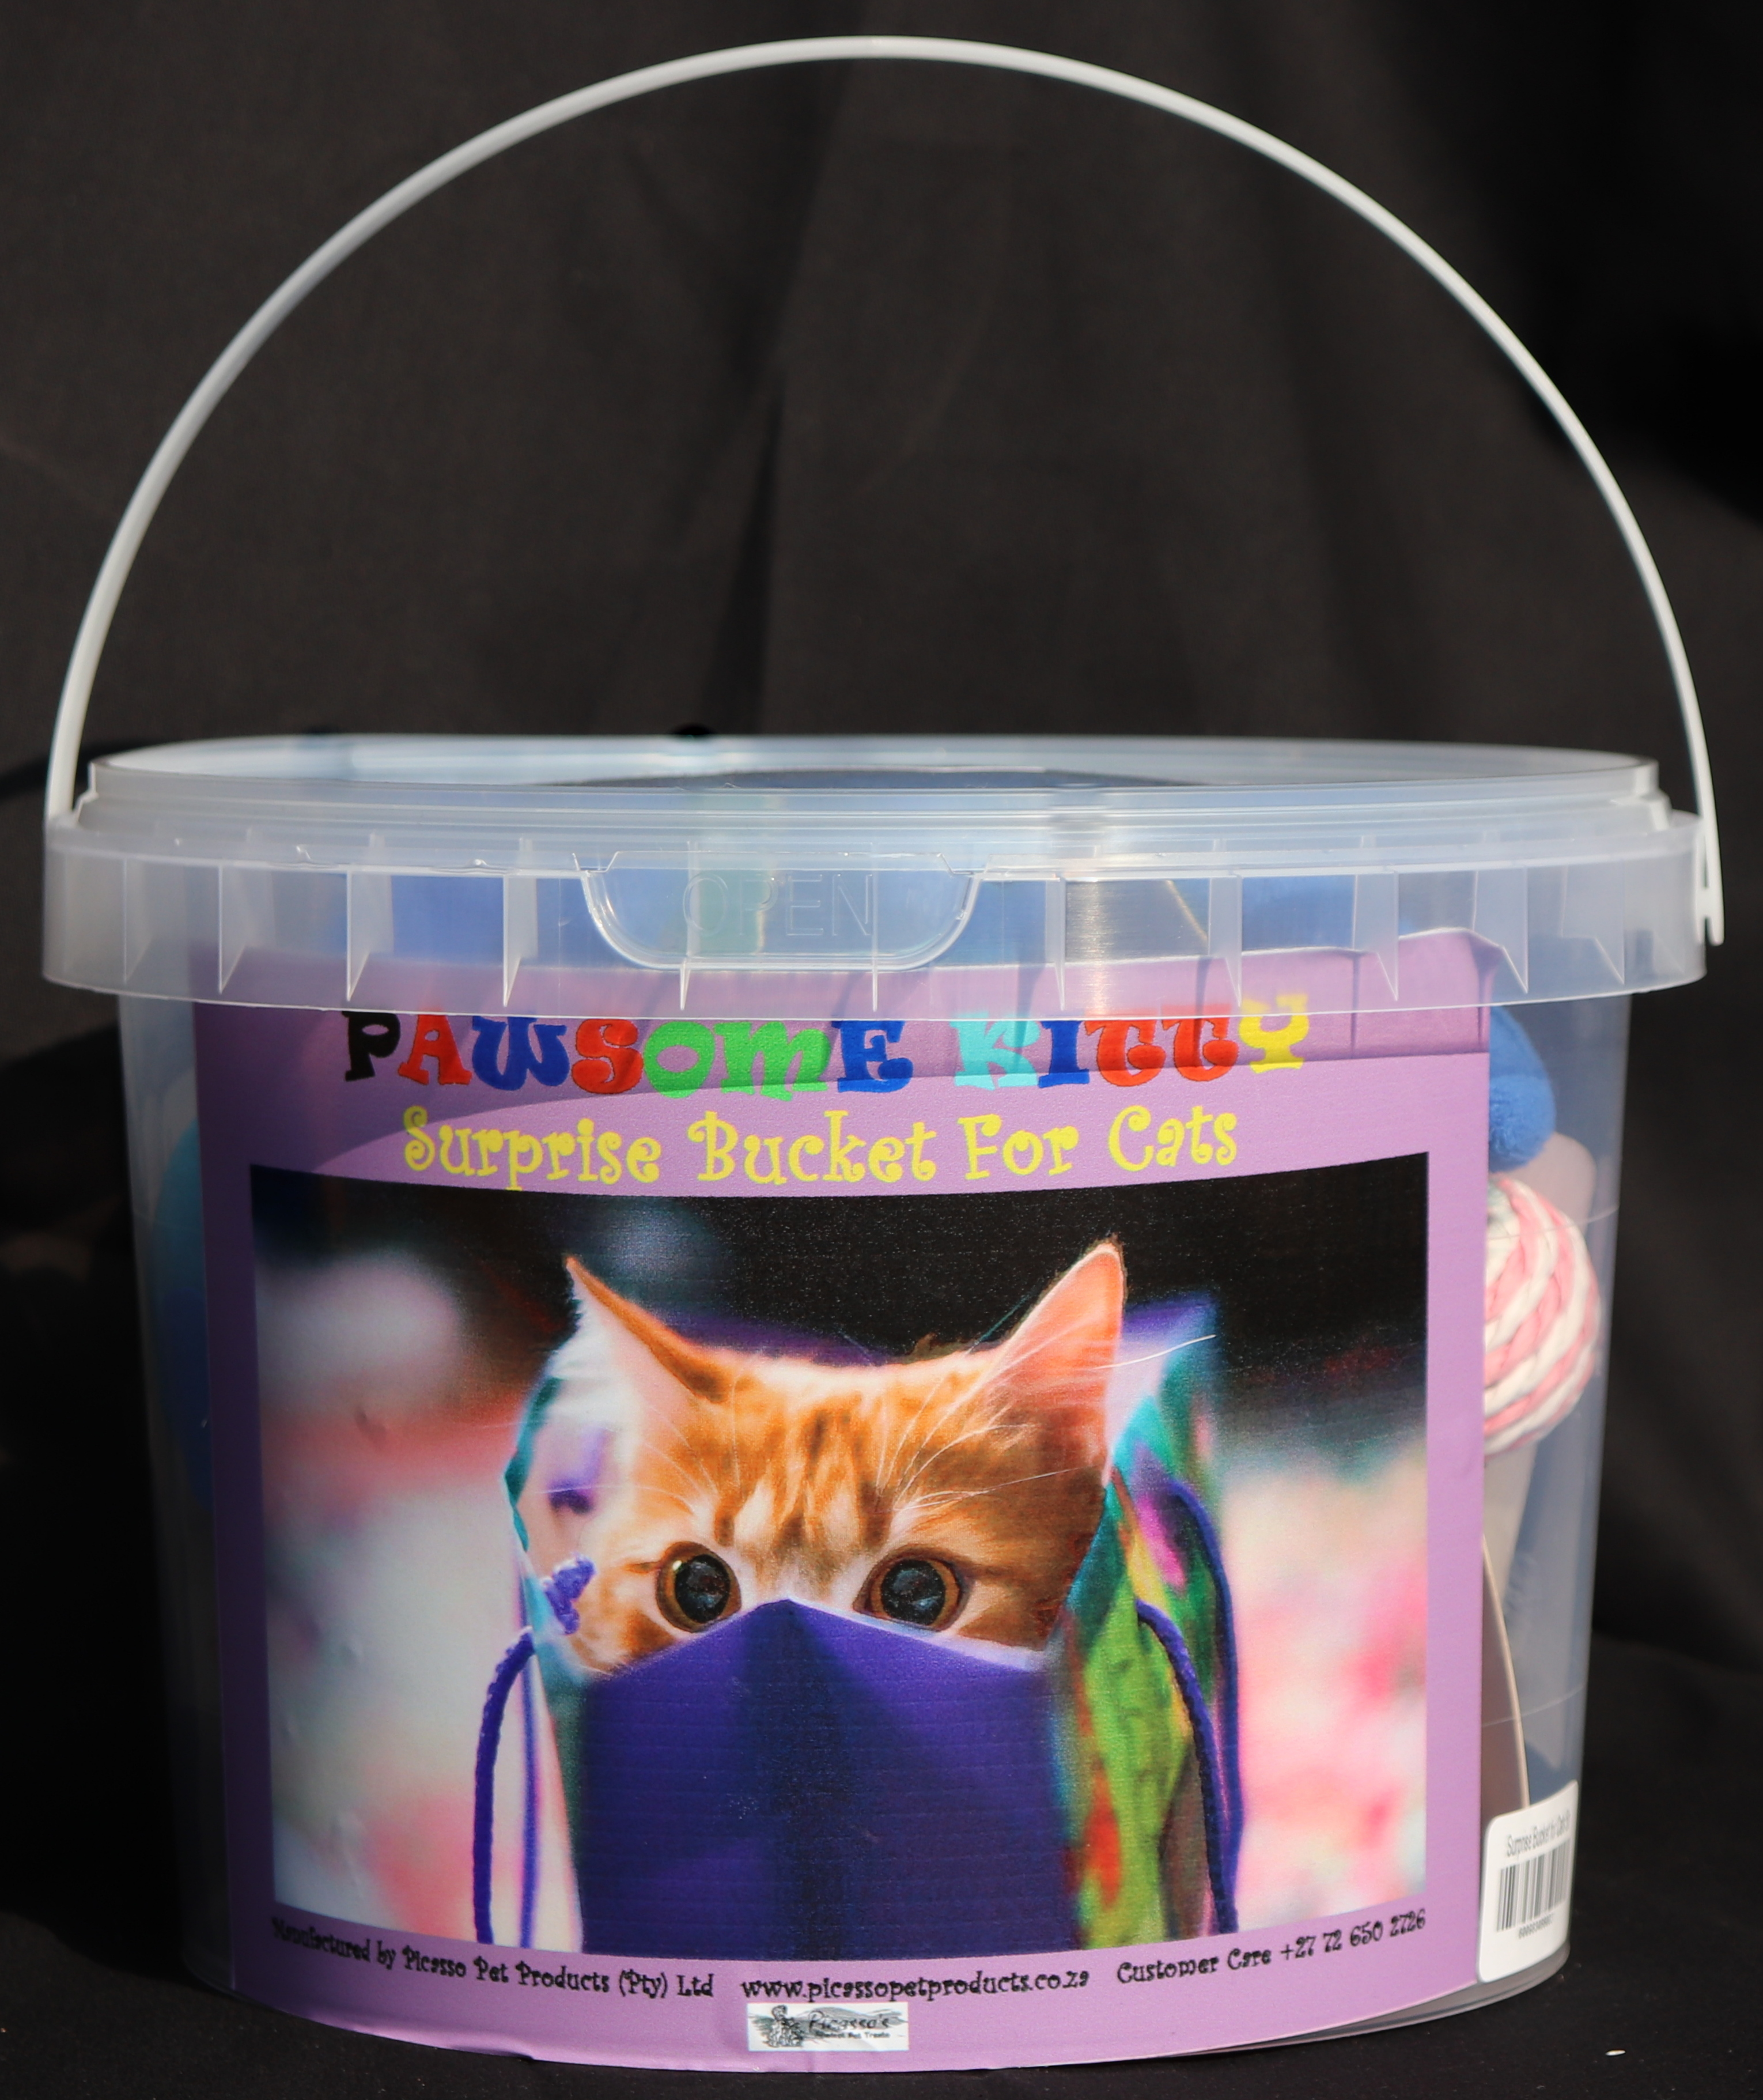 surprise-bucket-for-cats-5ltr